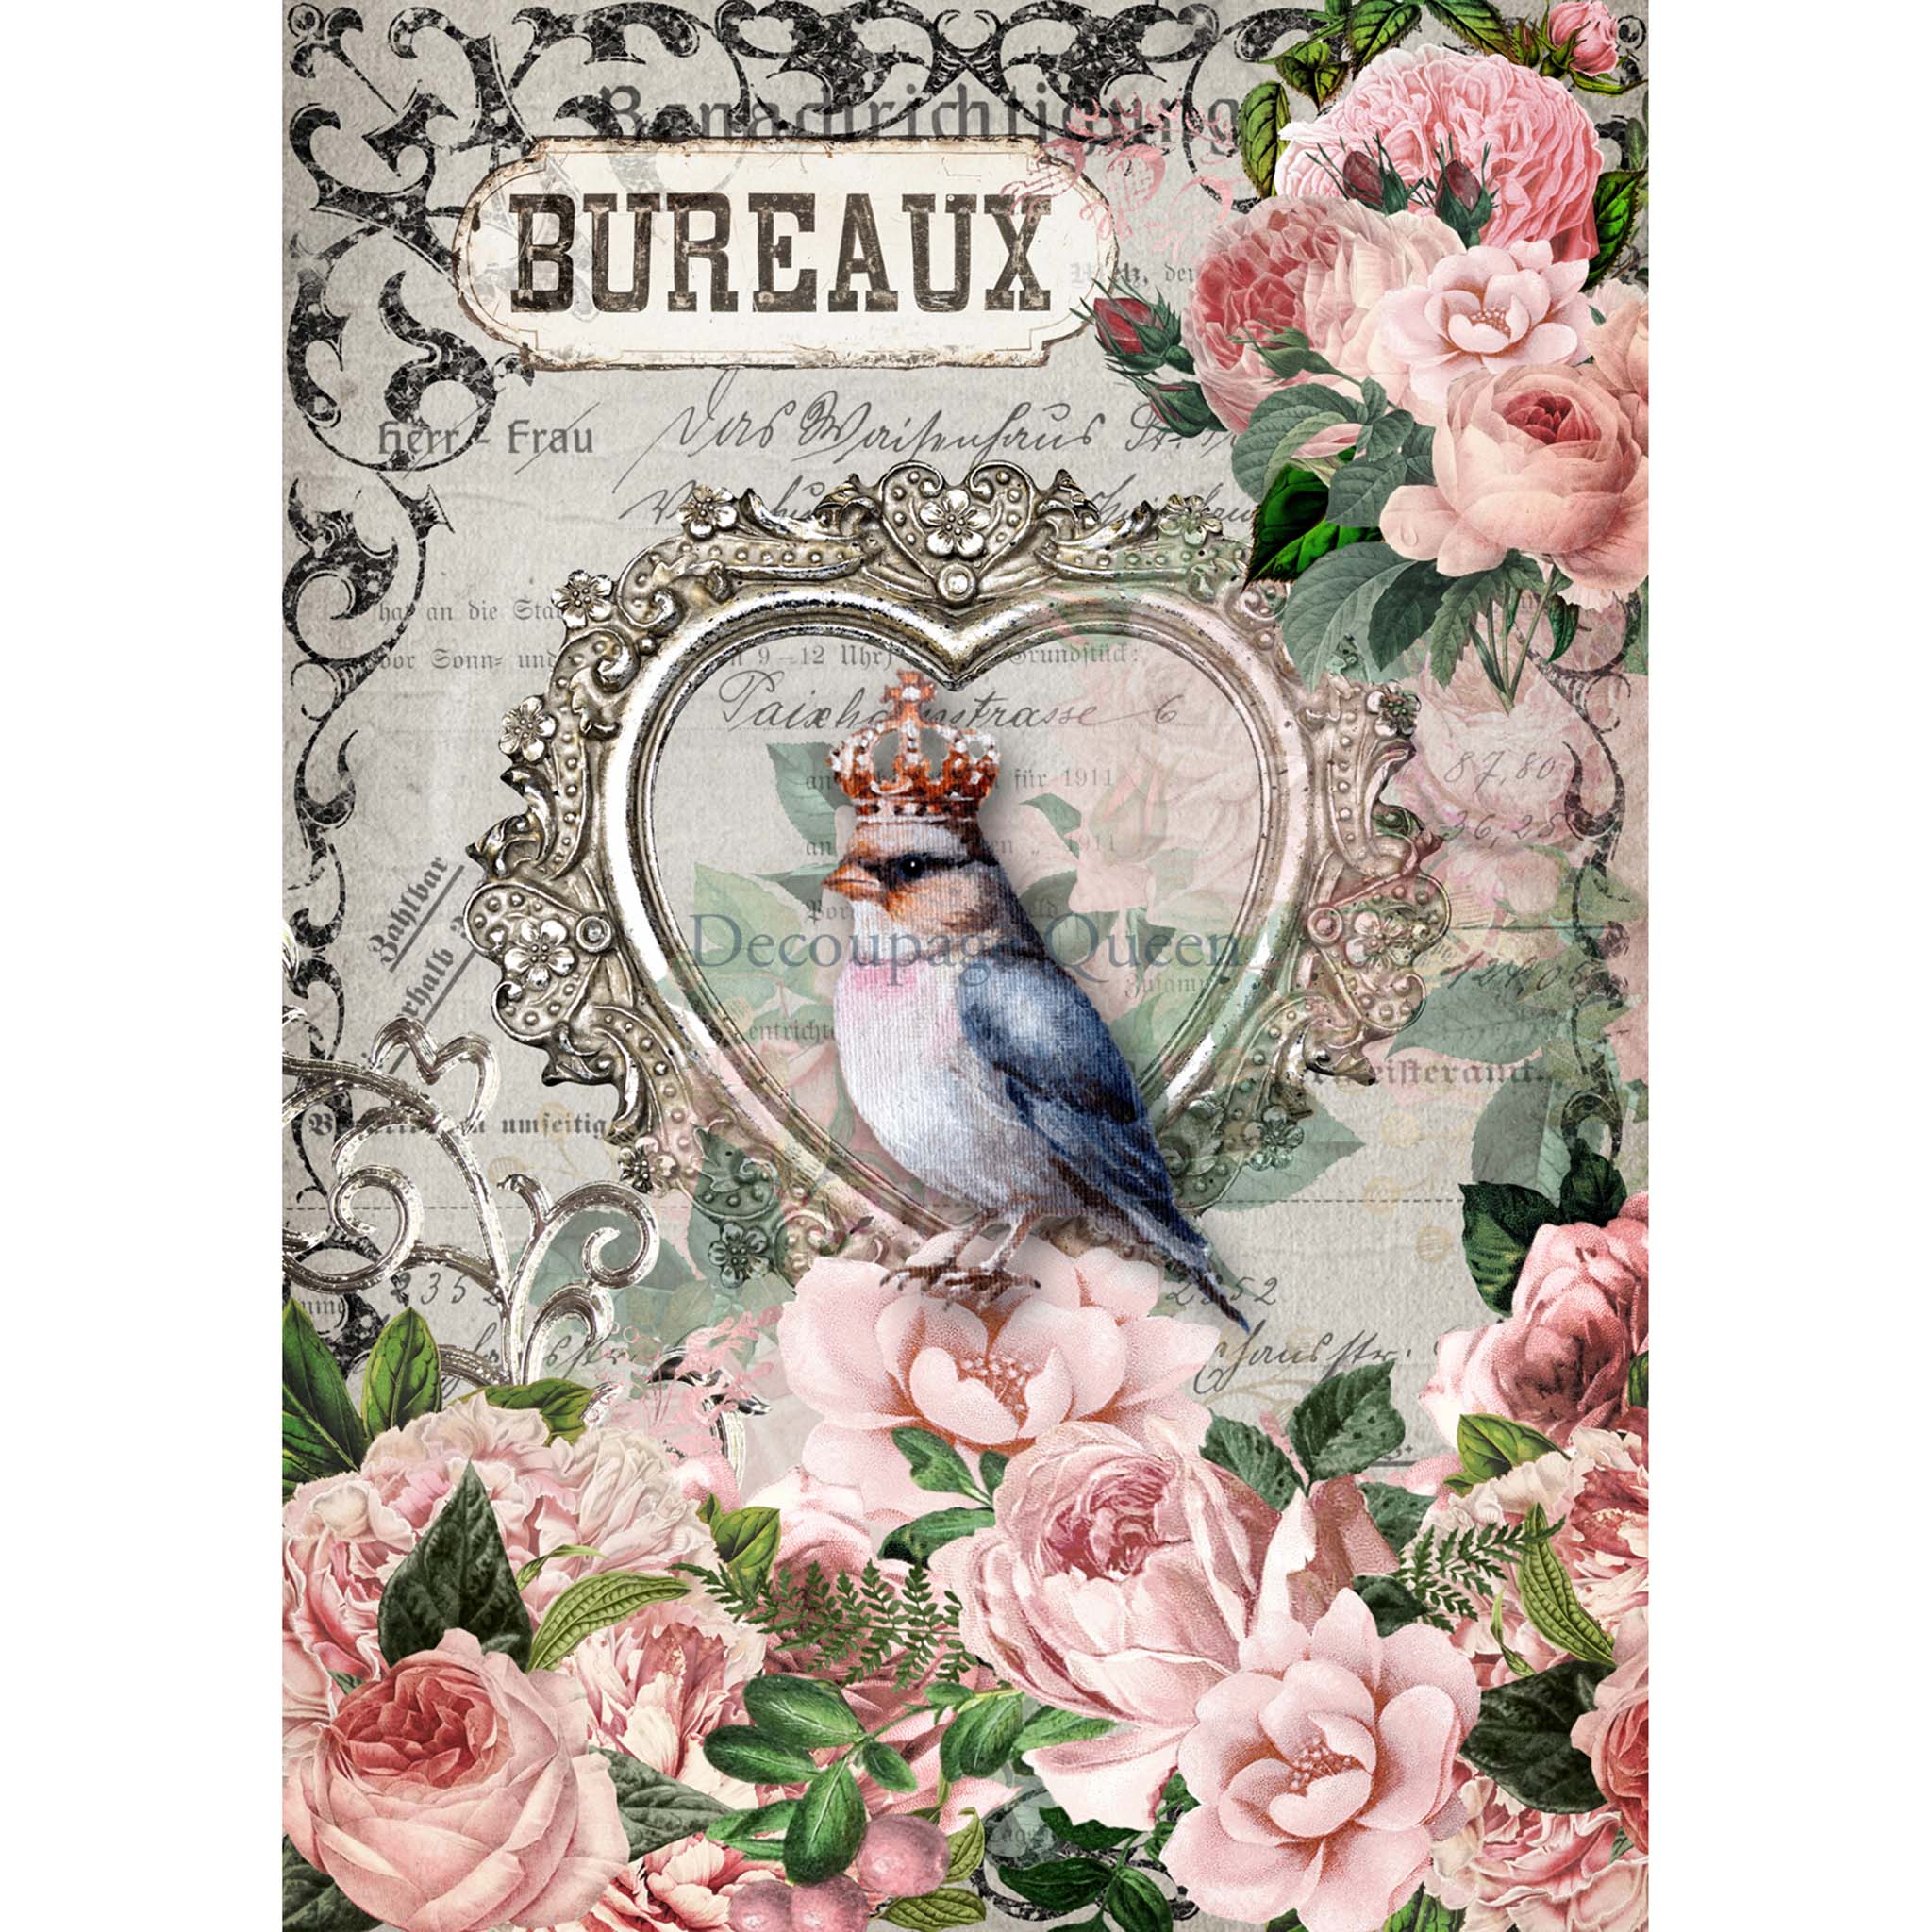 A4 rice paper design that features delicate pink roses, a charming bluebird wearing a crown while sitting in a heart picture frame, and a vintage French document. White borders are on the sides.